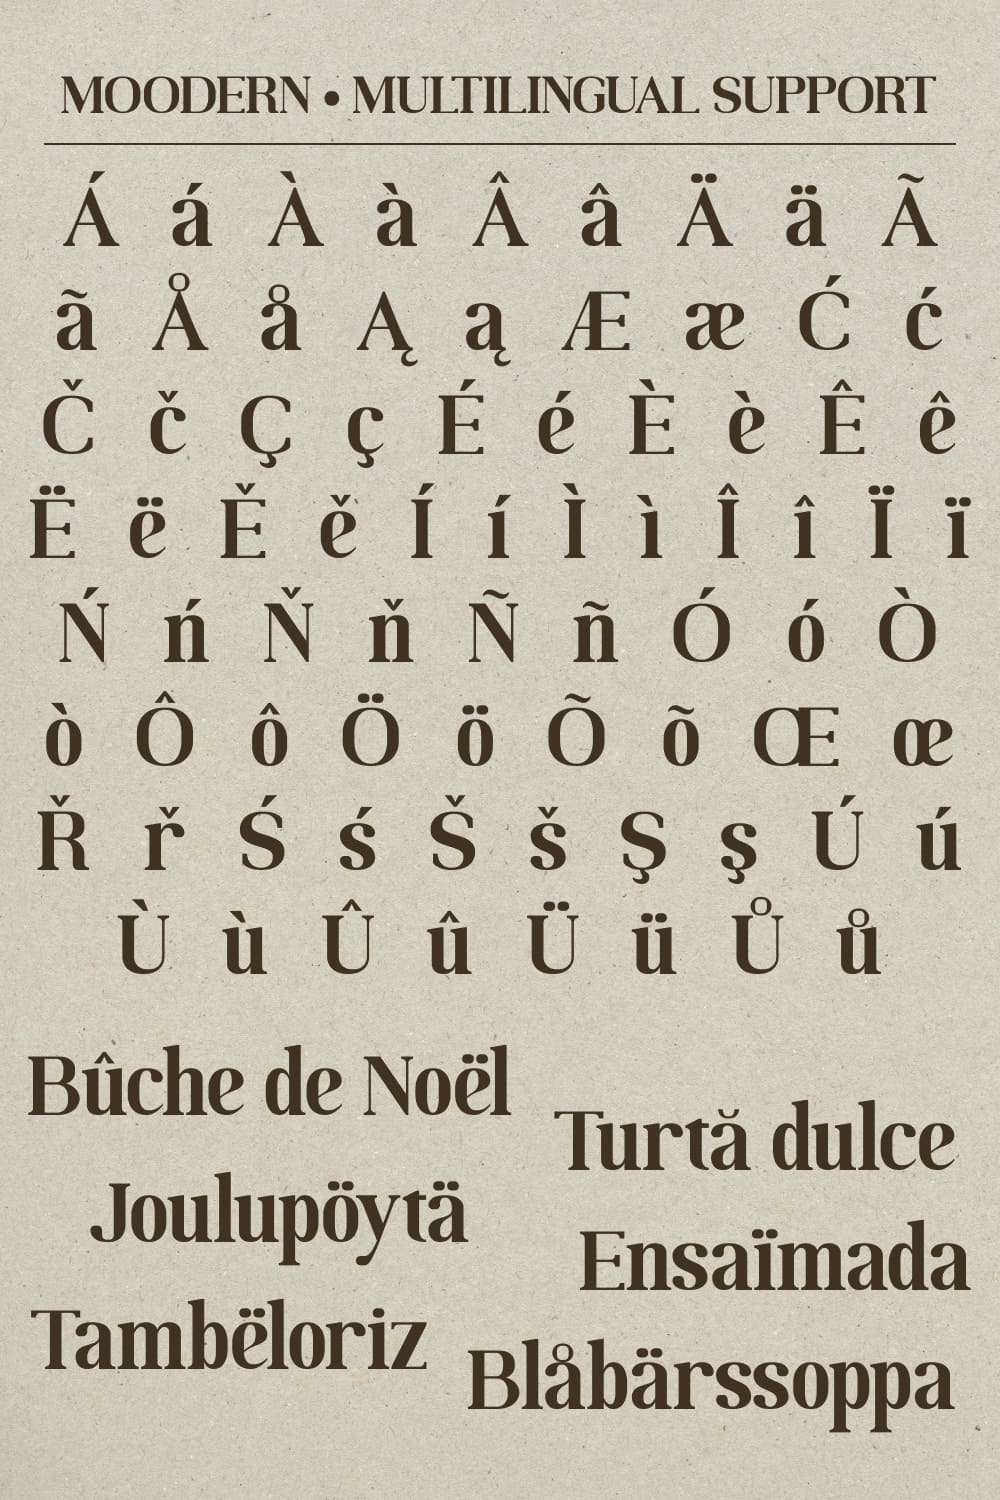 The vintage typeface is similar to Italian Vogue.